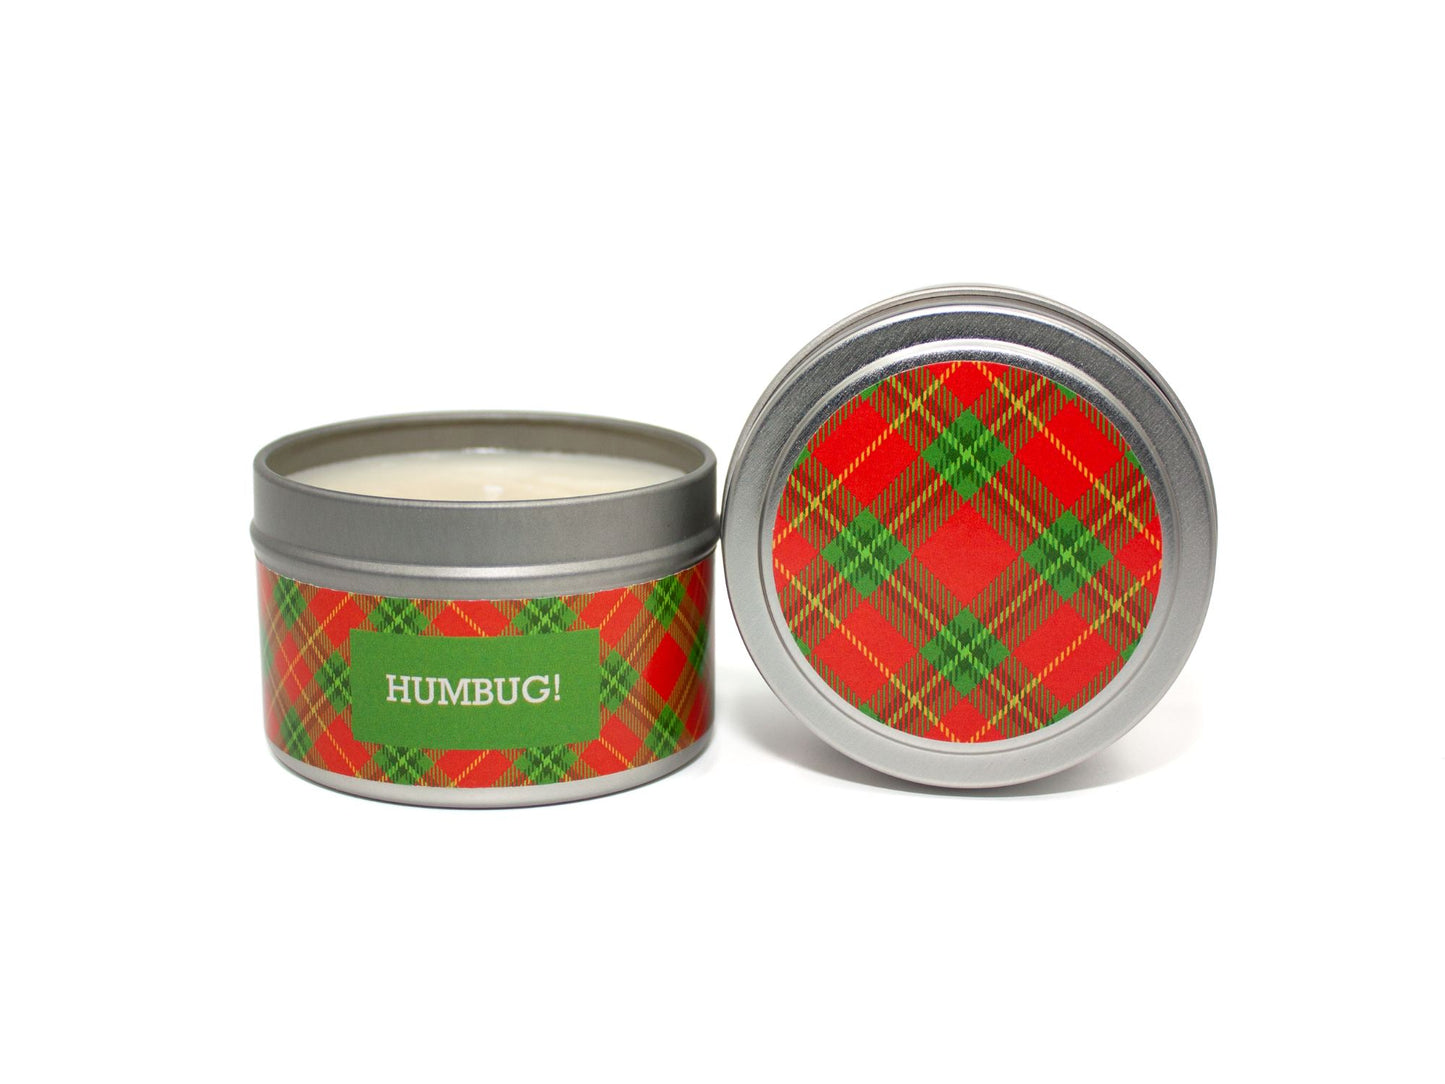 Onset & Rime sweet, smoky scented candle called "Humbug!" in a 4 oz silver tin. The circular label on top is a red and green plaid pattern. The text on the front label is "Humbug! - Roasted Chestnuts, Toasted Marshmallow, Wood Fire".